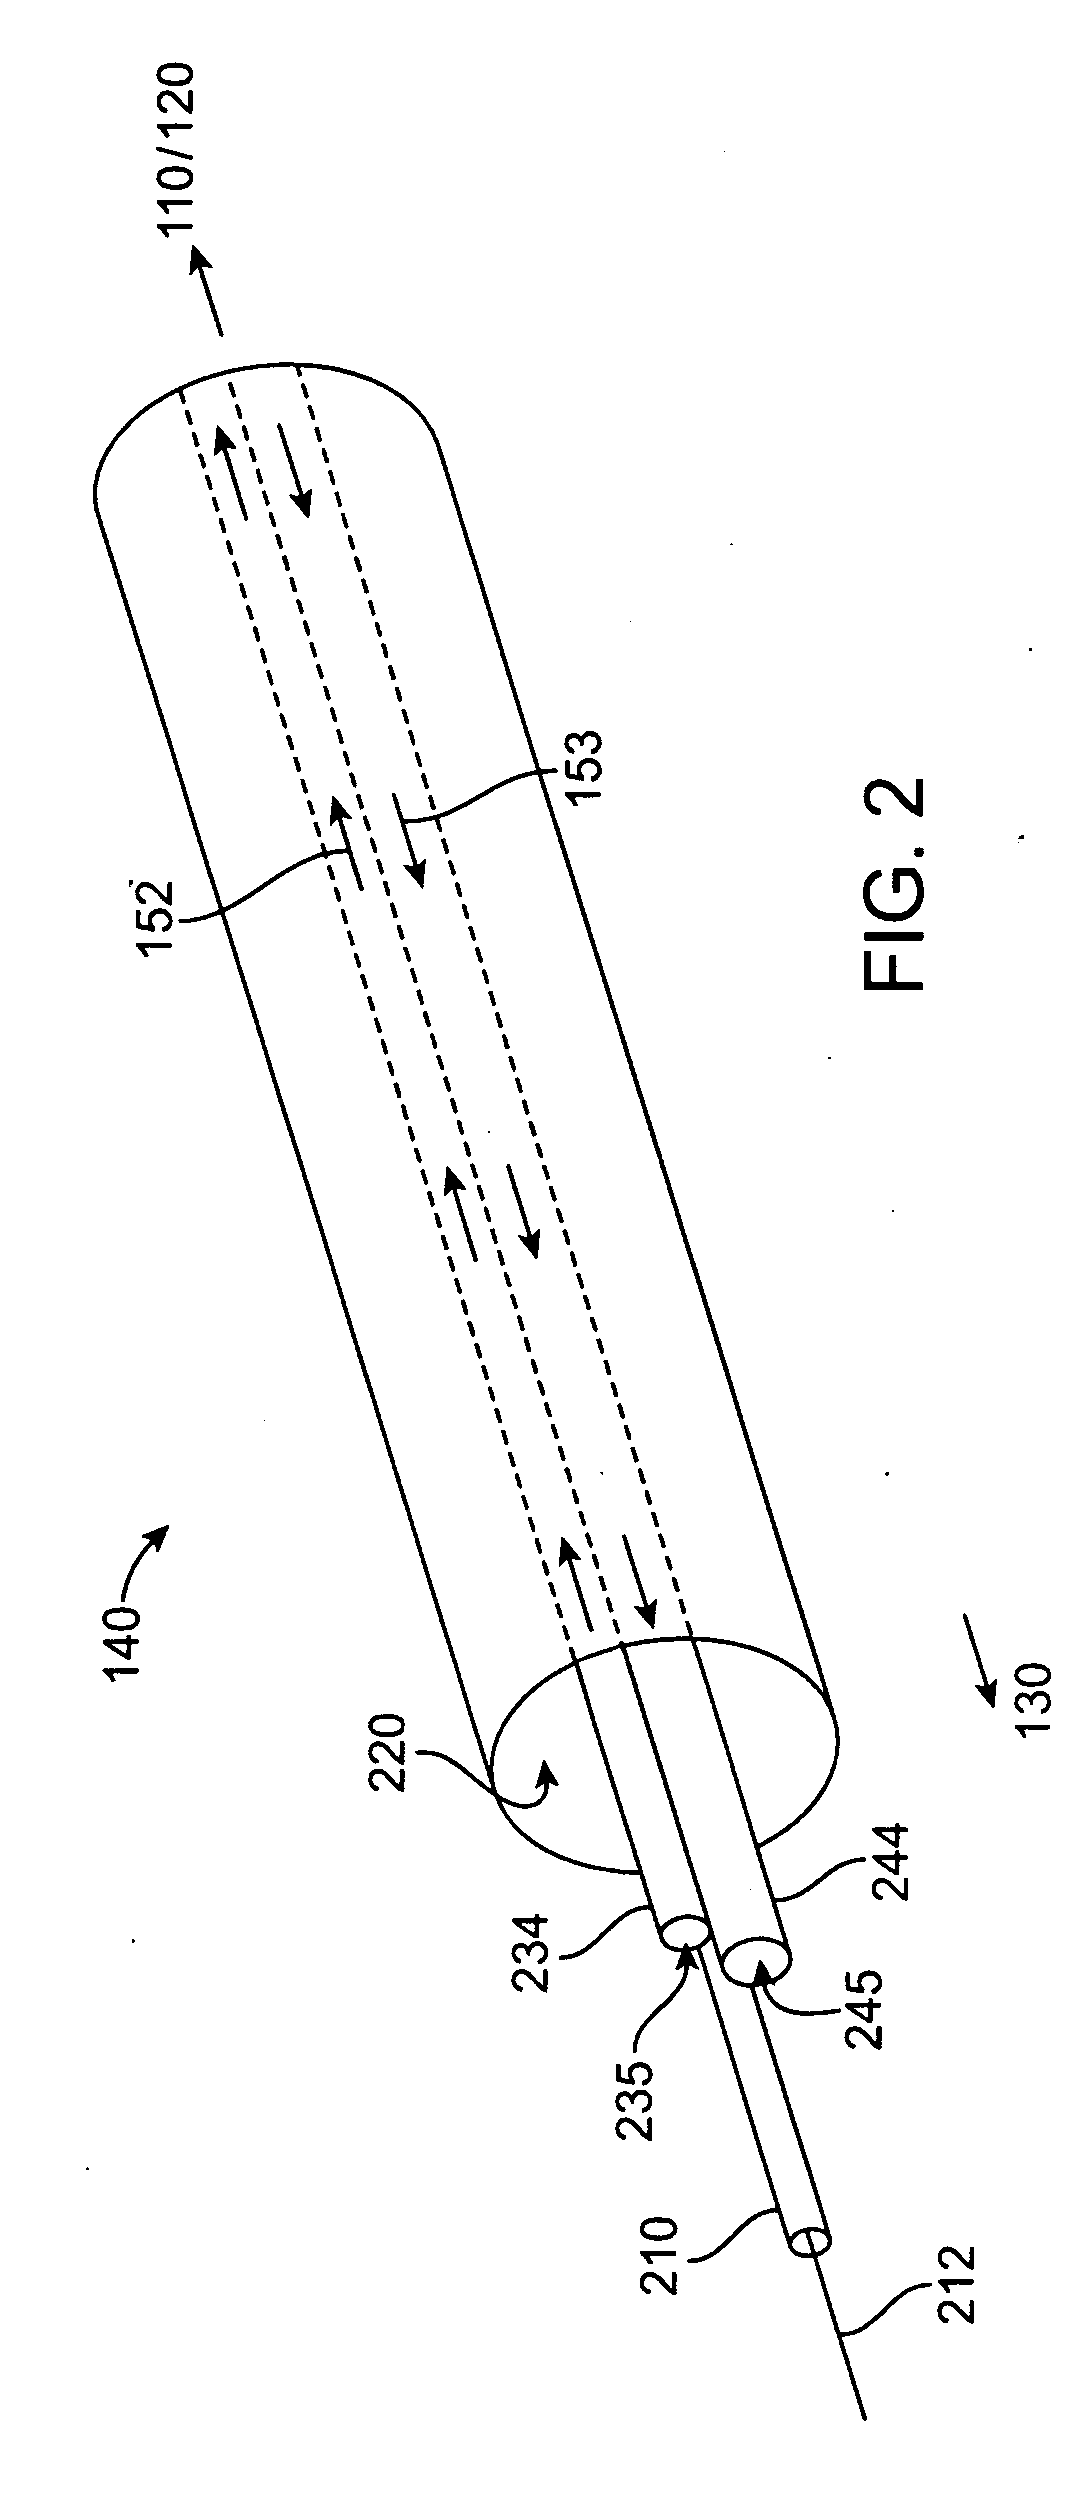 Apparatus and methods for cryogenically ablating tissue and adjusting cryogenic ablation regions